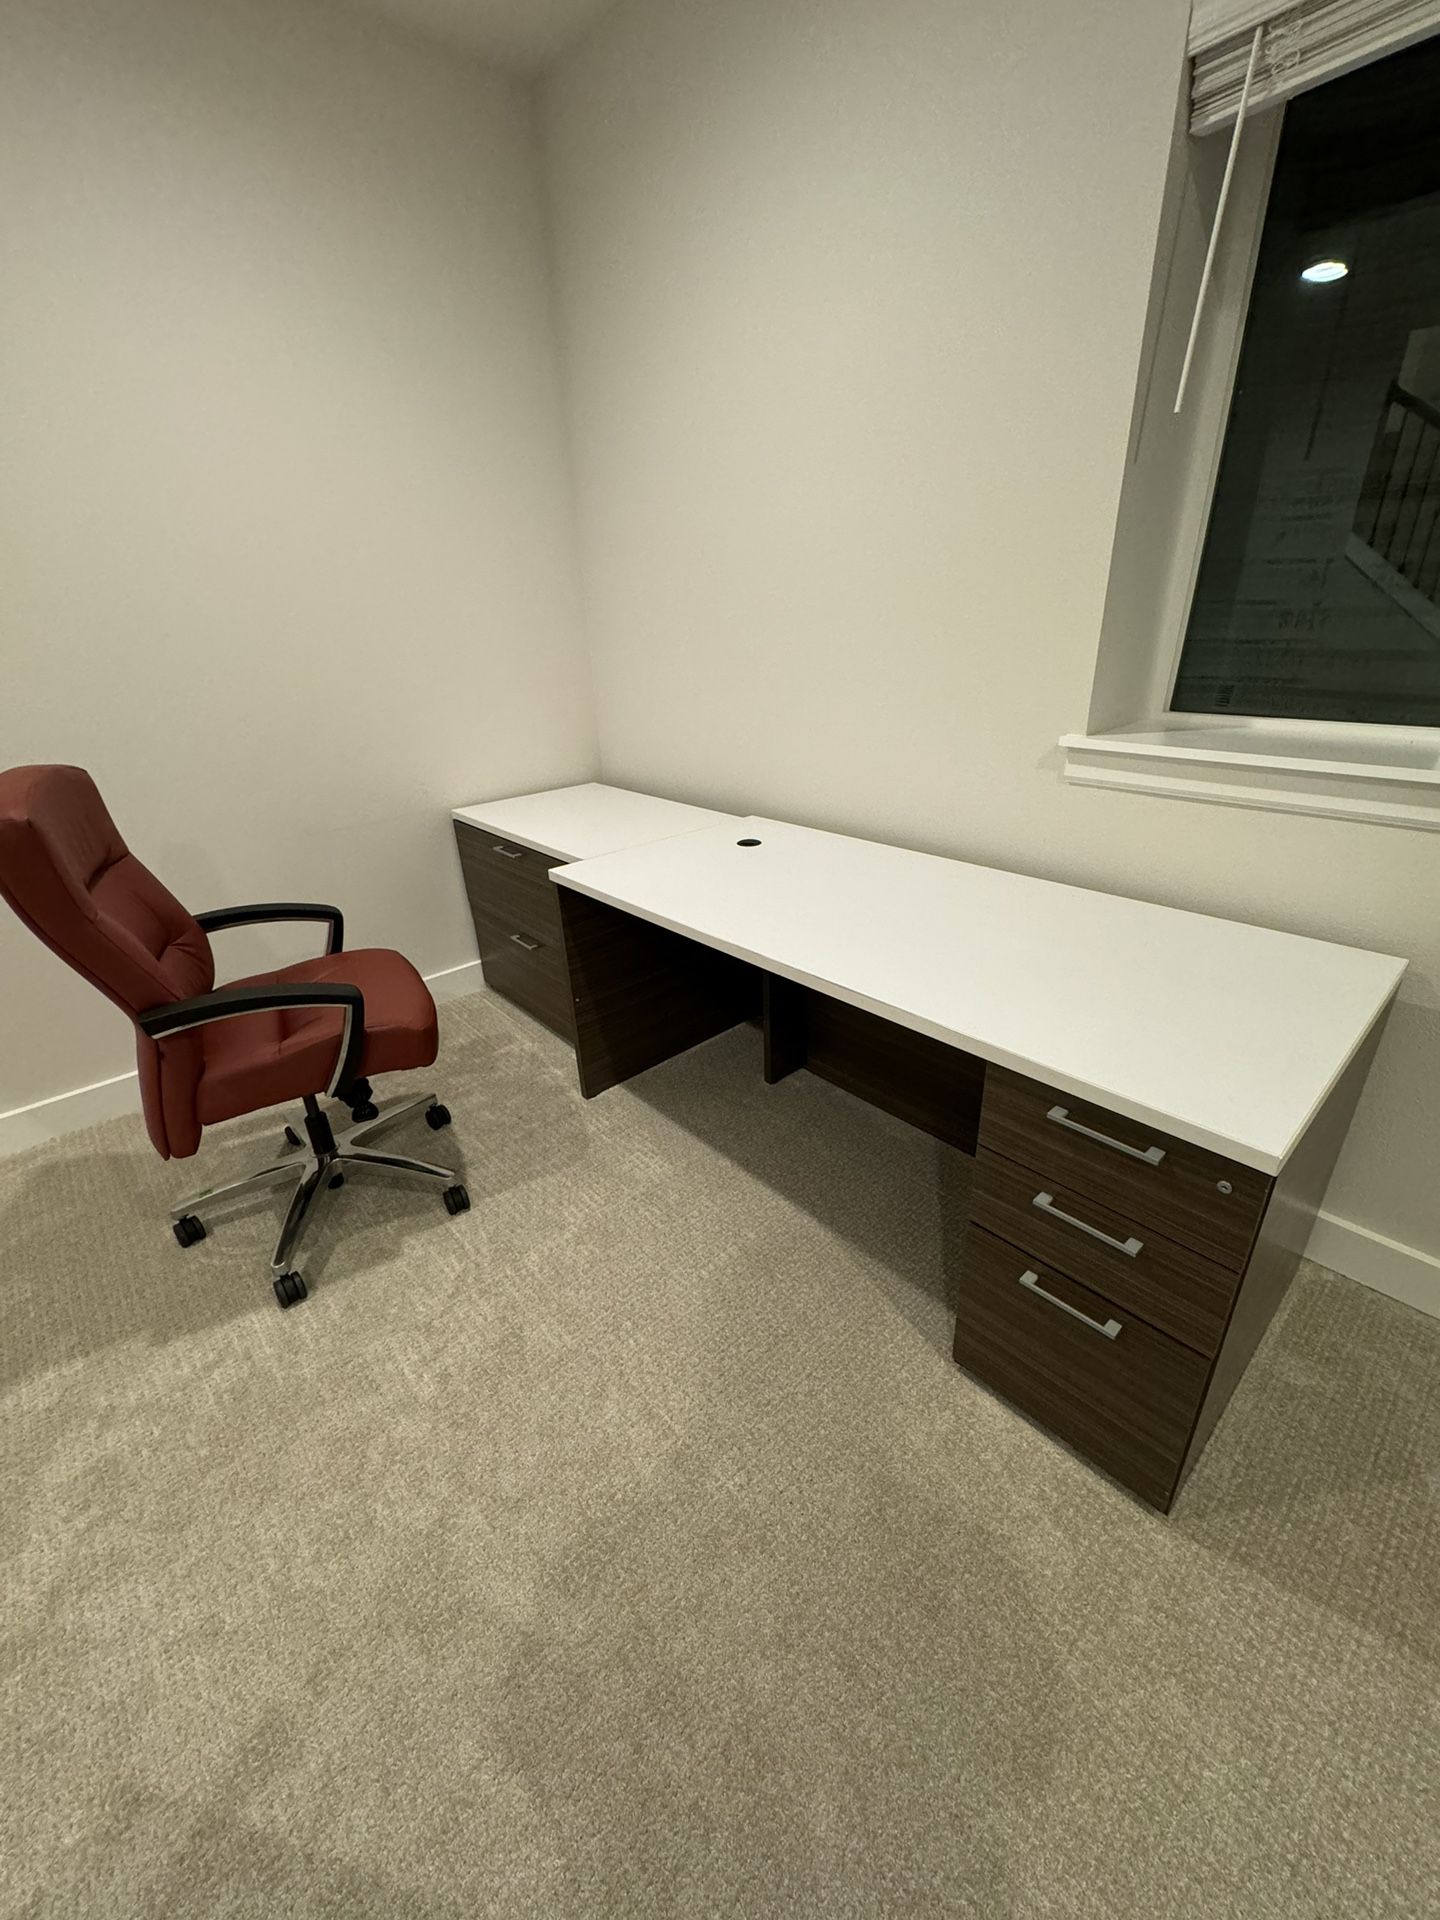  Combo Office Desk, File Cabinet And Chair For Sale